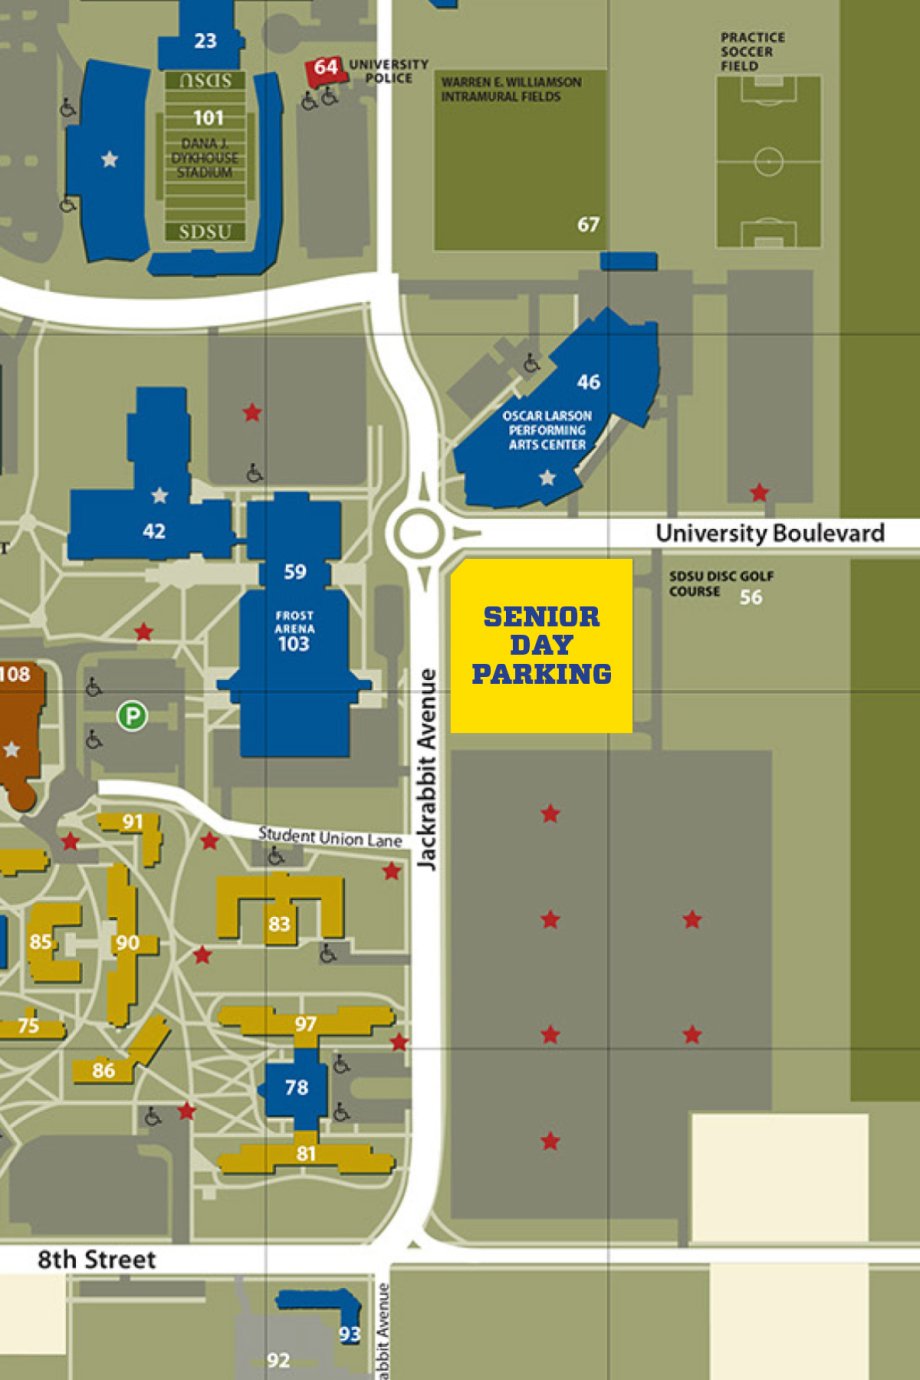 Campus map showing Senior Day parking areas.